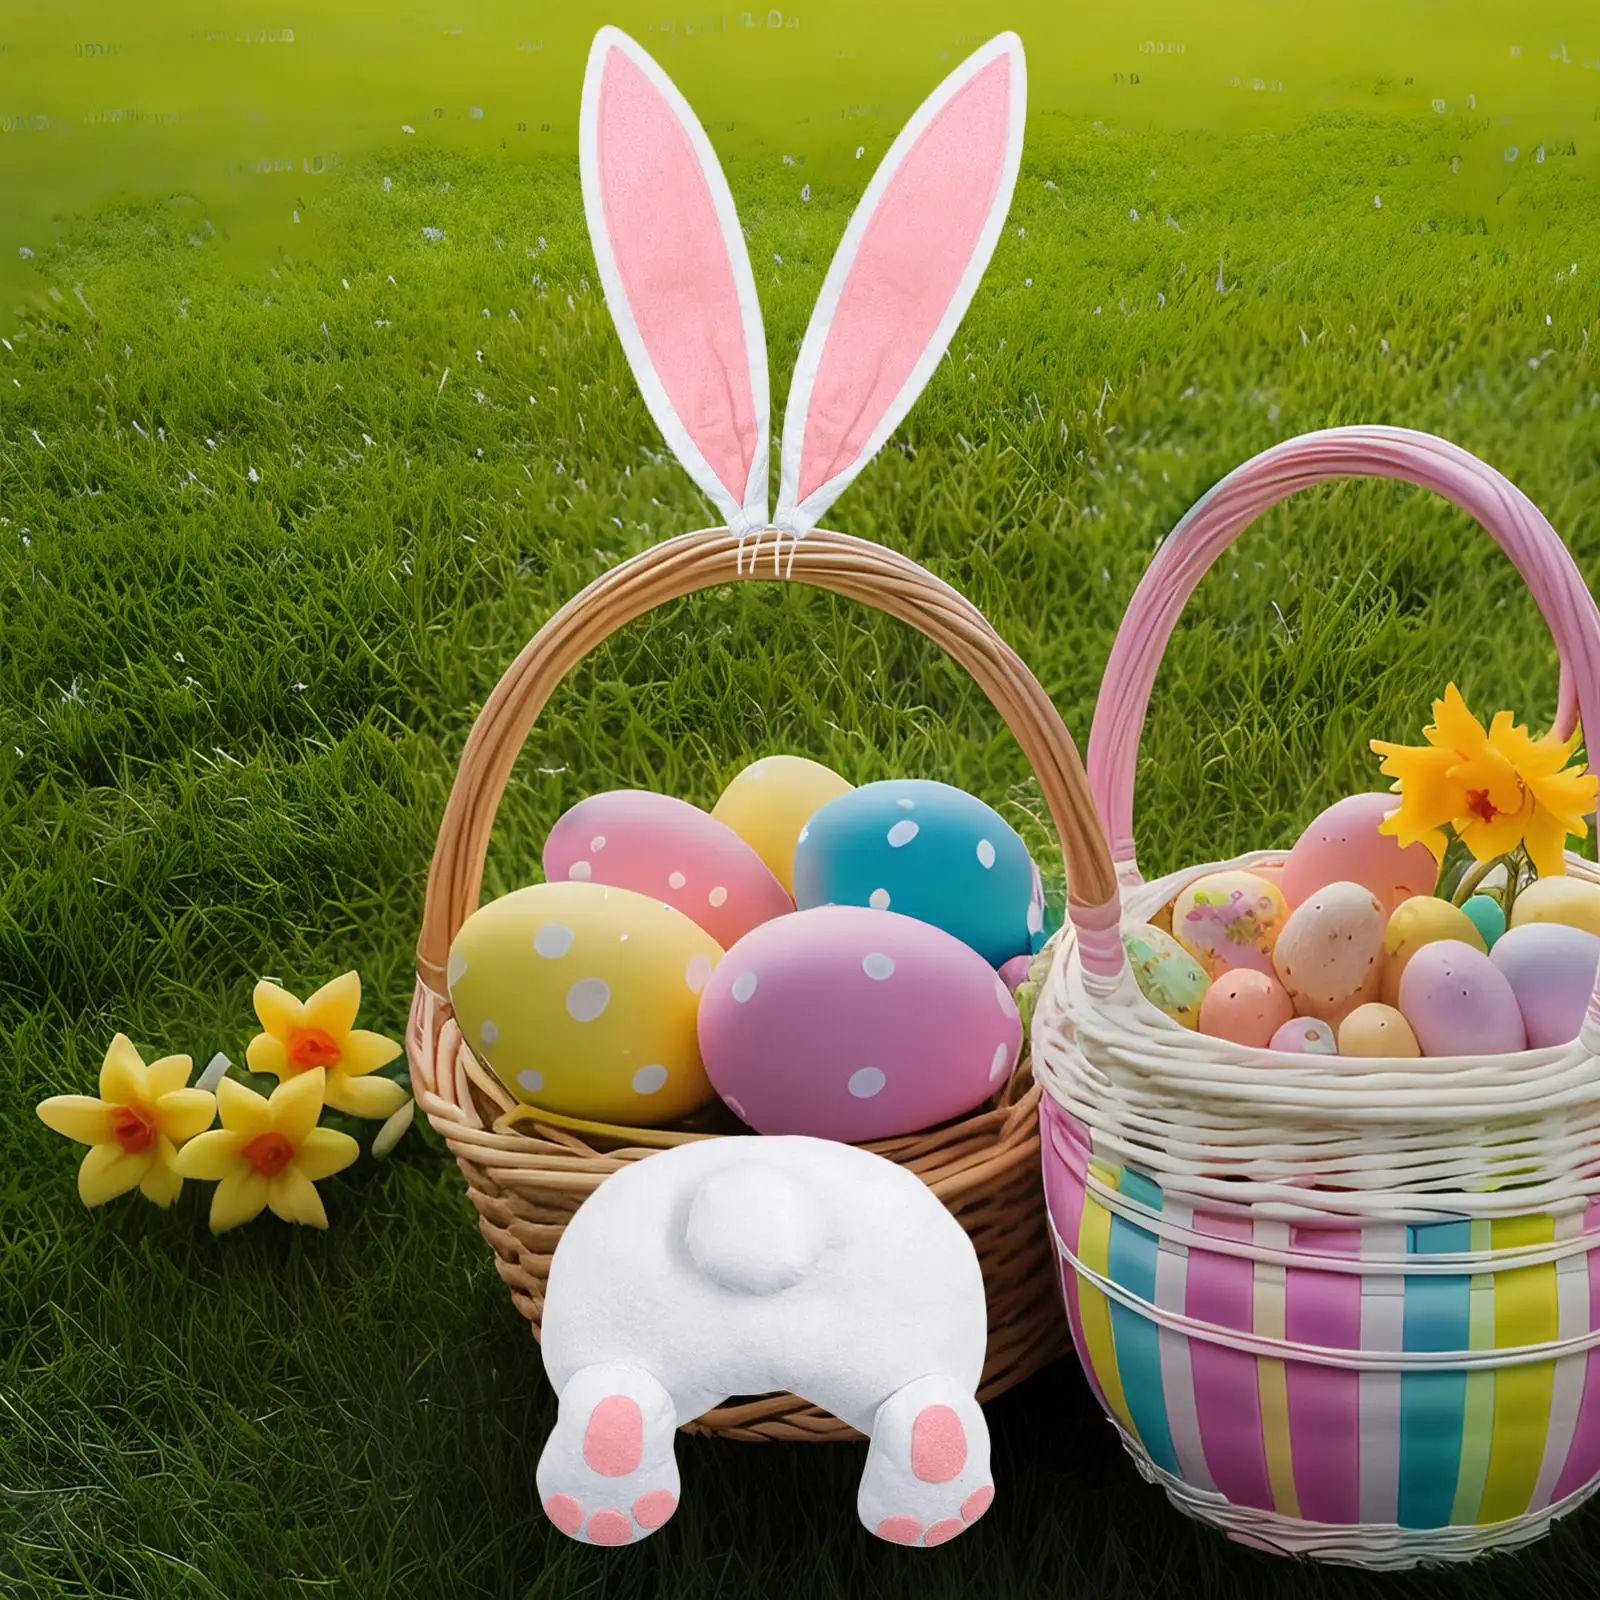  Buand Ears for Wreath Wreath Embellishment Cartoon Easter Decorations for Front Door Wreath Spring Outdoor Home Wall